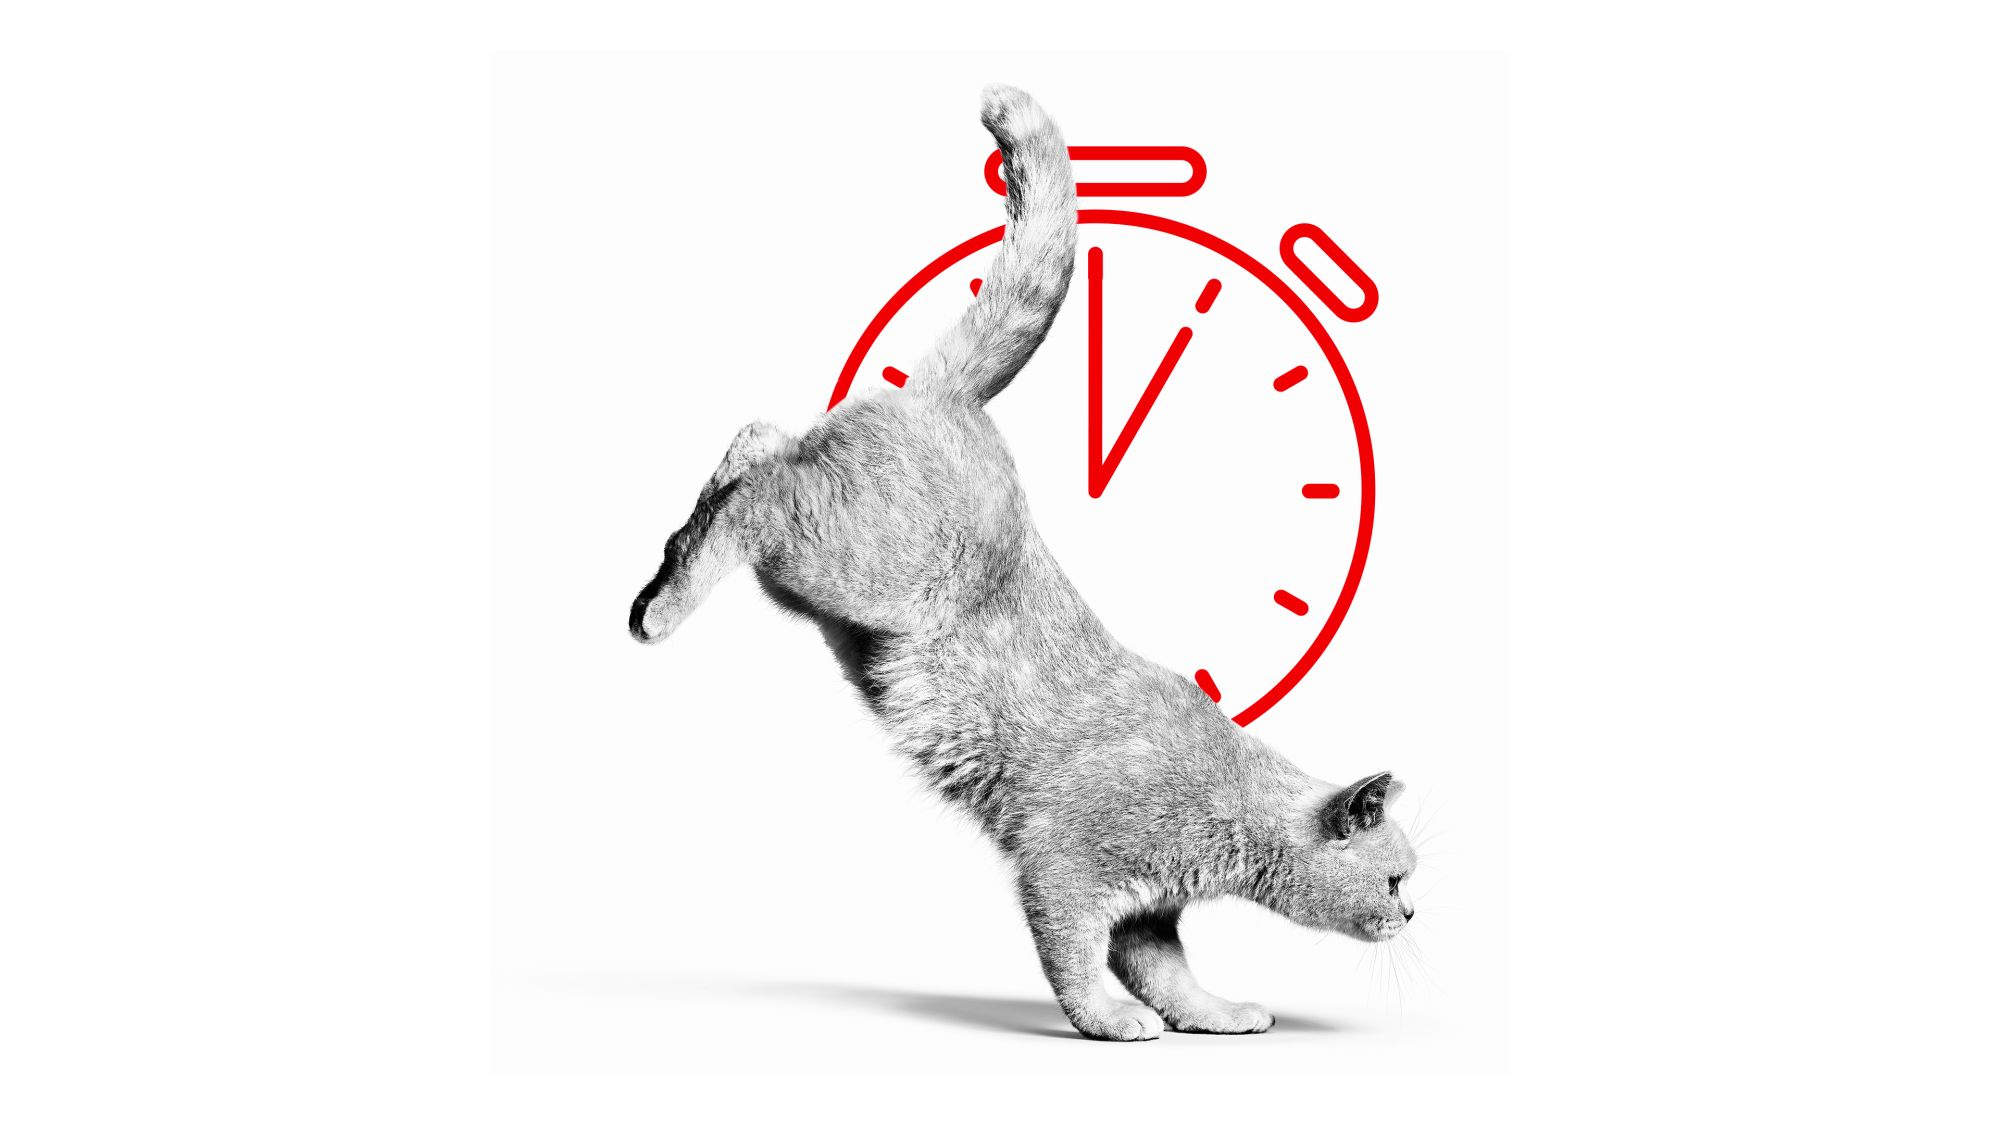 British Shorthair adult jumping in black and white with a red ball with a stop watch illustration behind